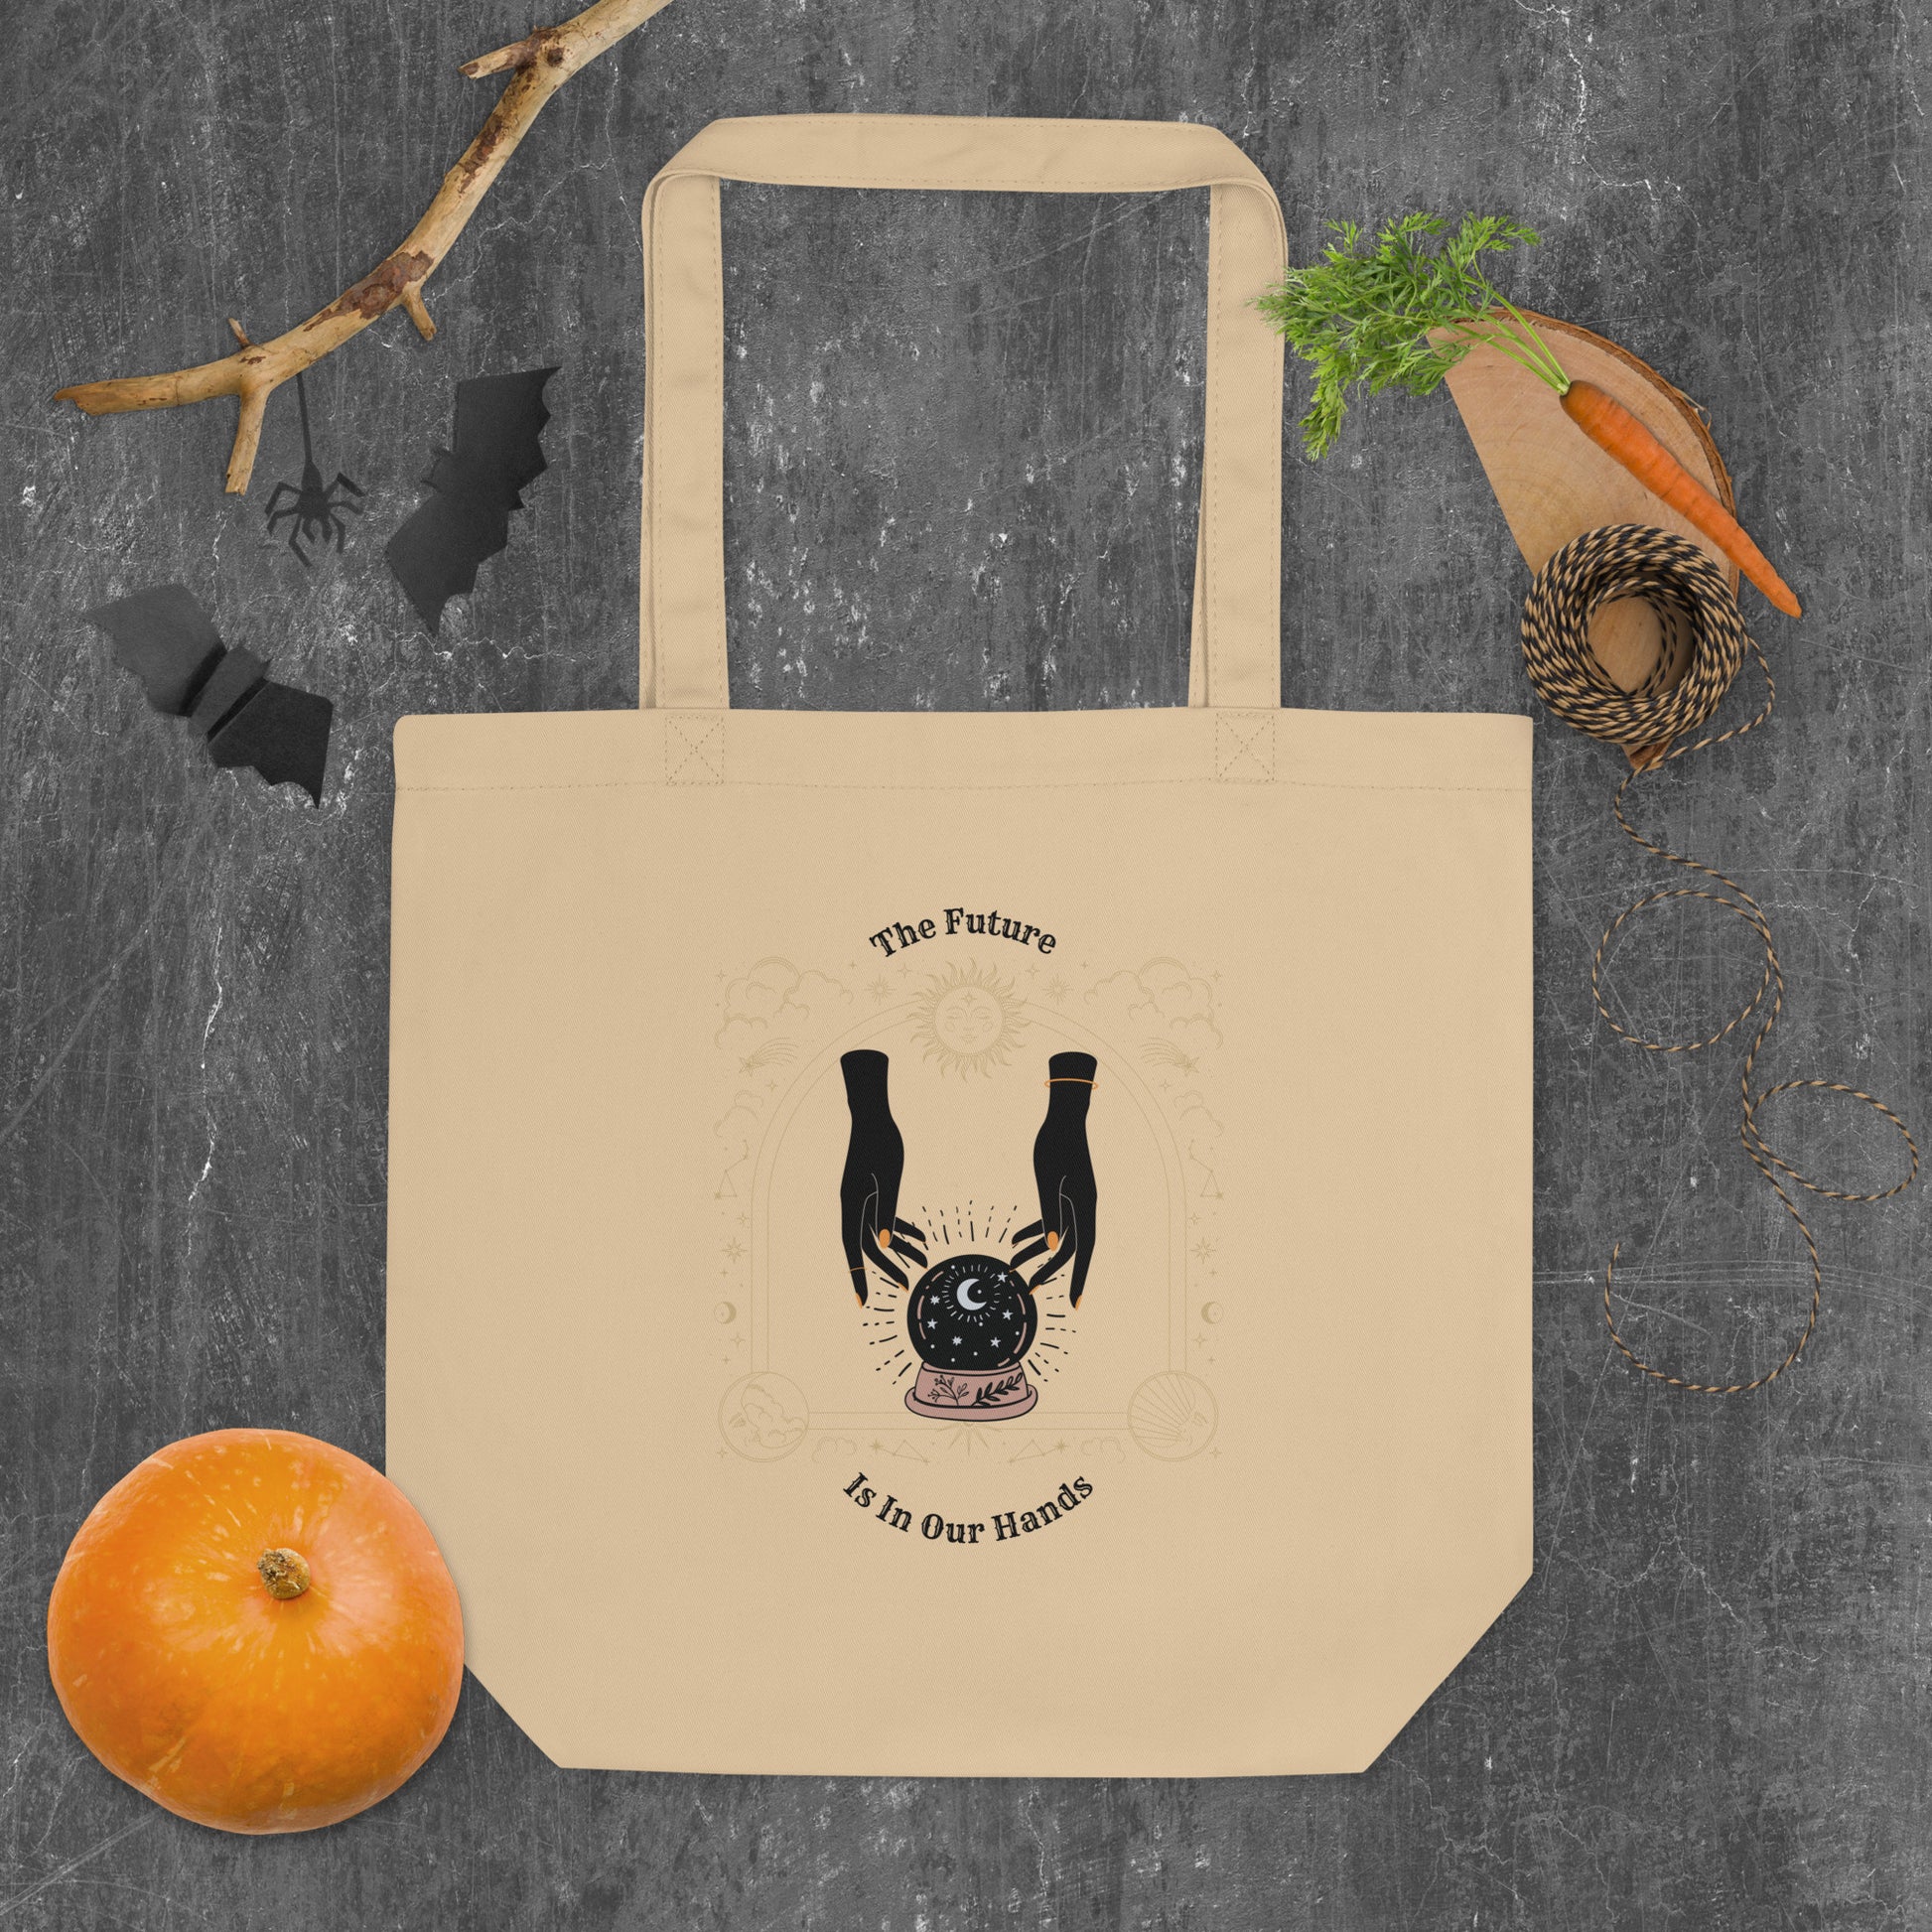 The Future Is In Our Hands Eco Tote Bag - A. Mandaline Art